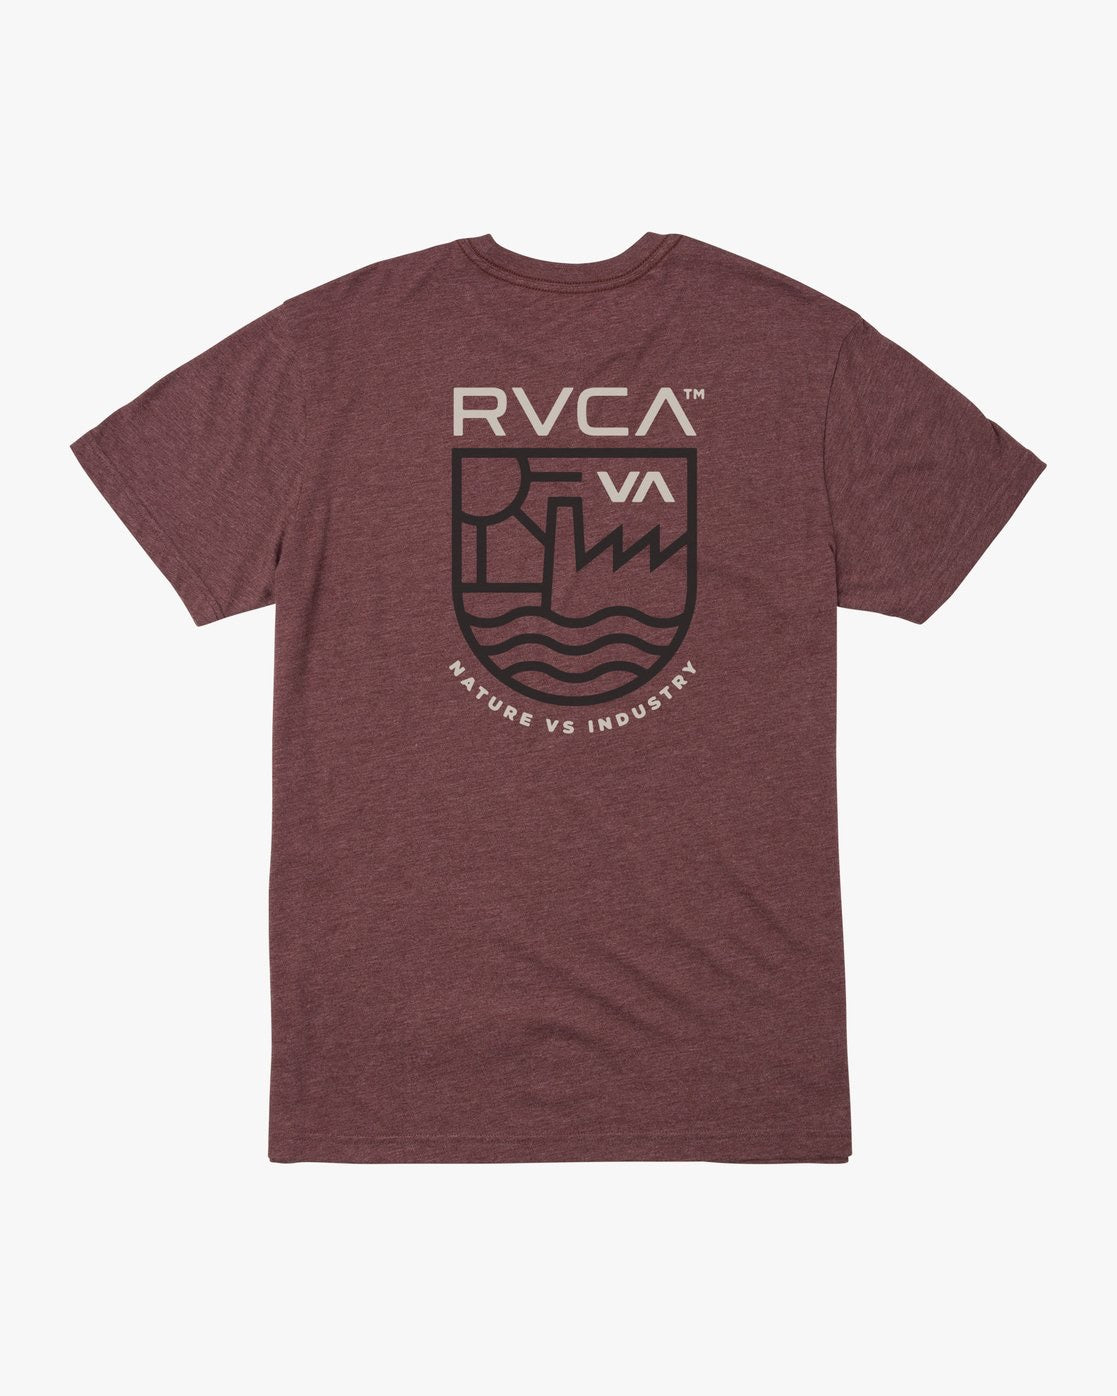 RVCA DEPT. OF INDUSTRY OXFORD RED